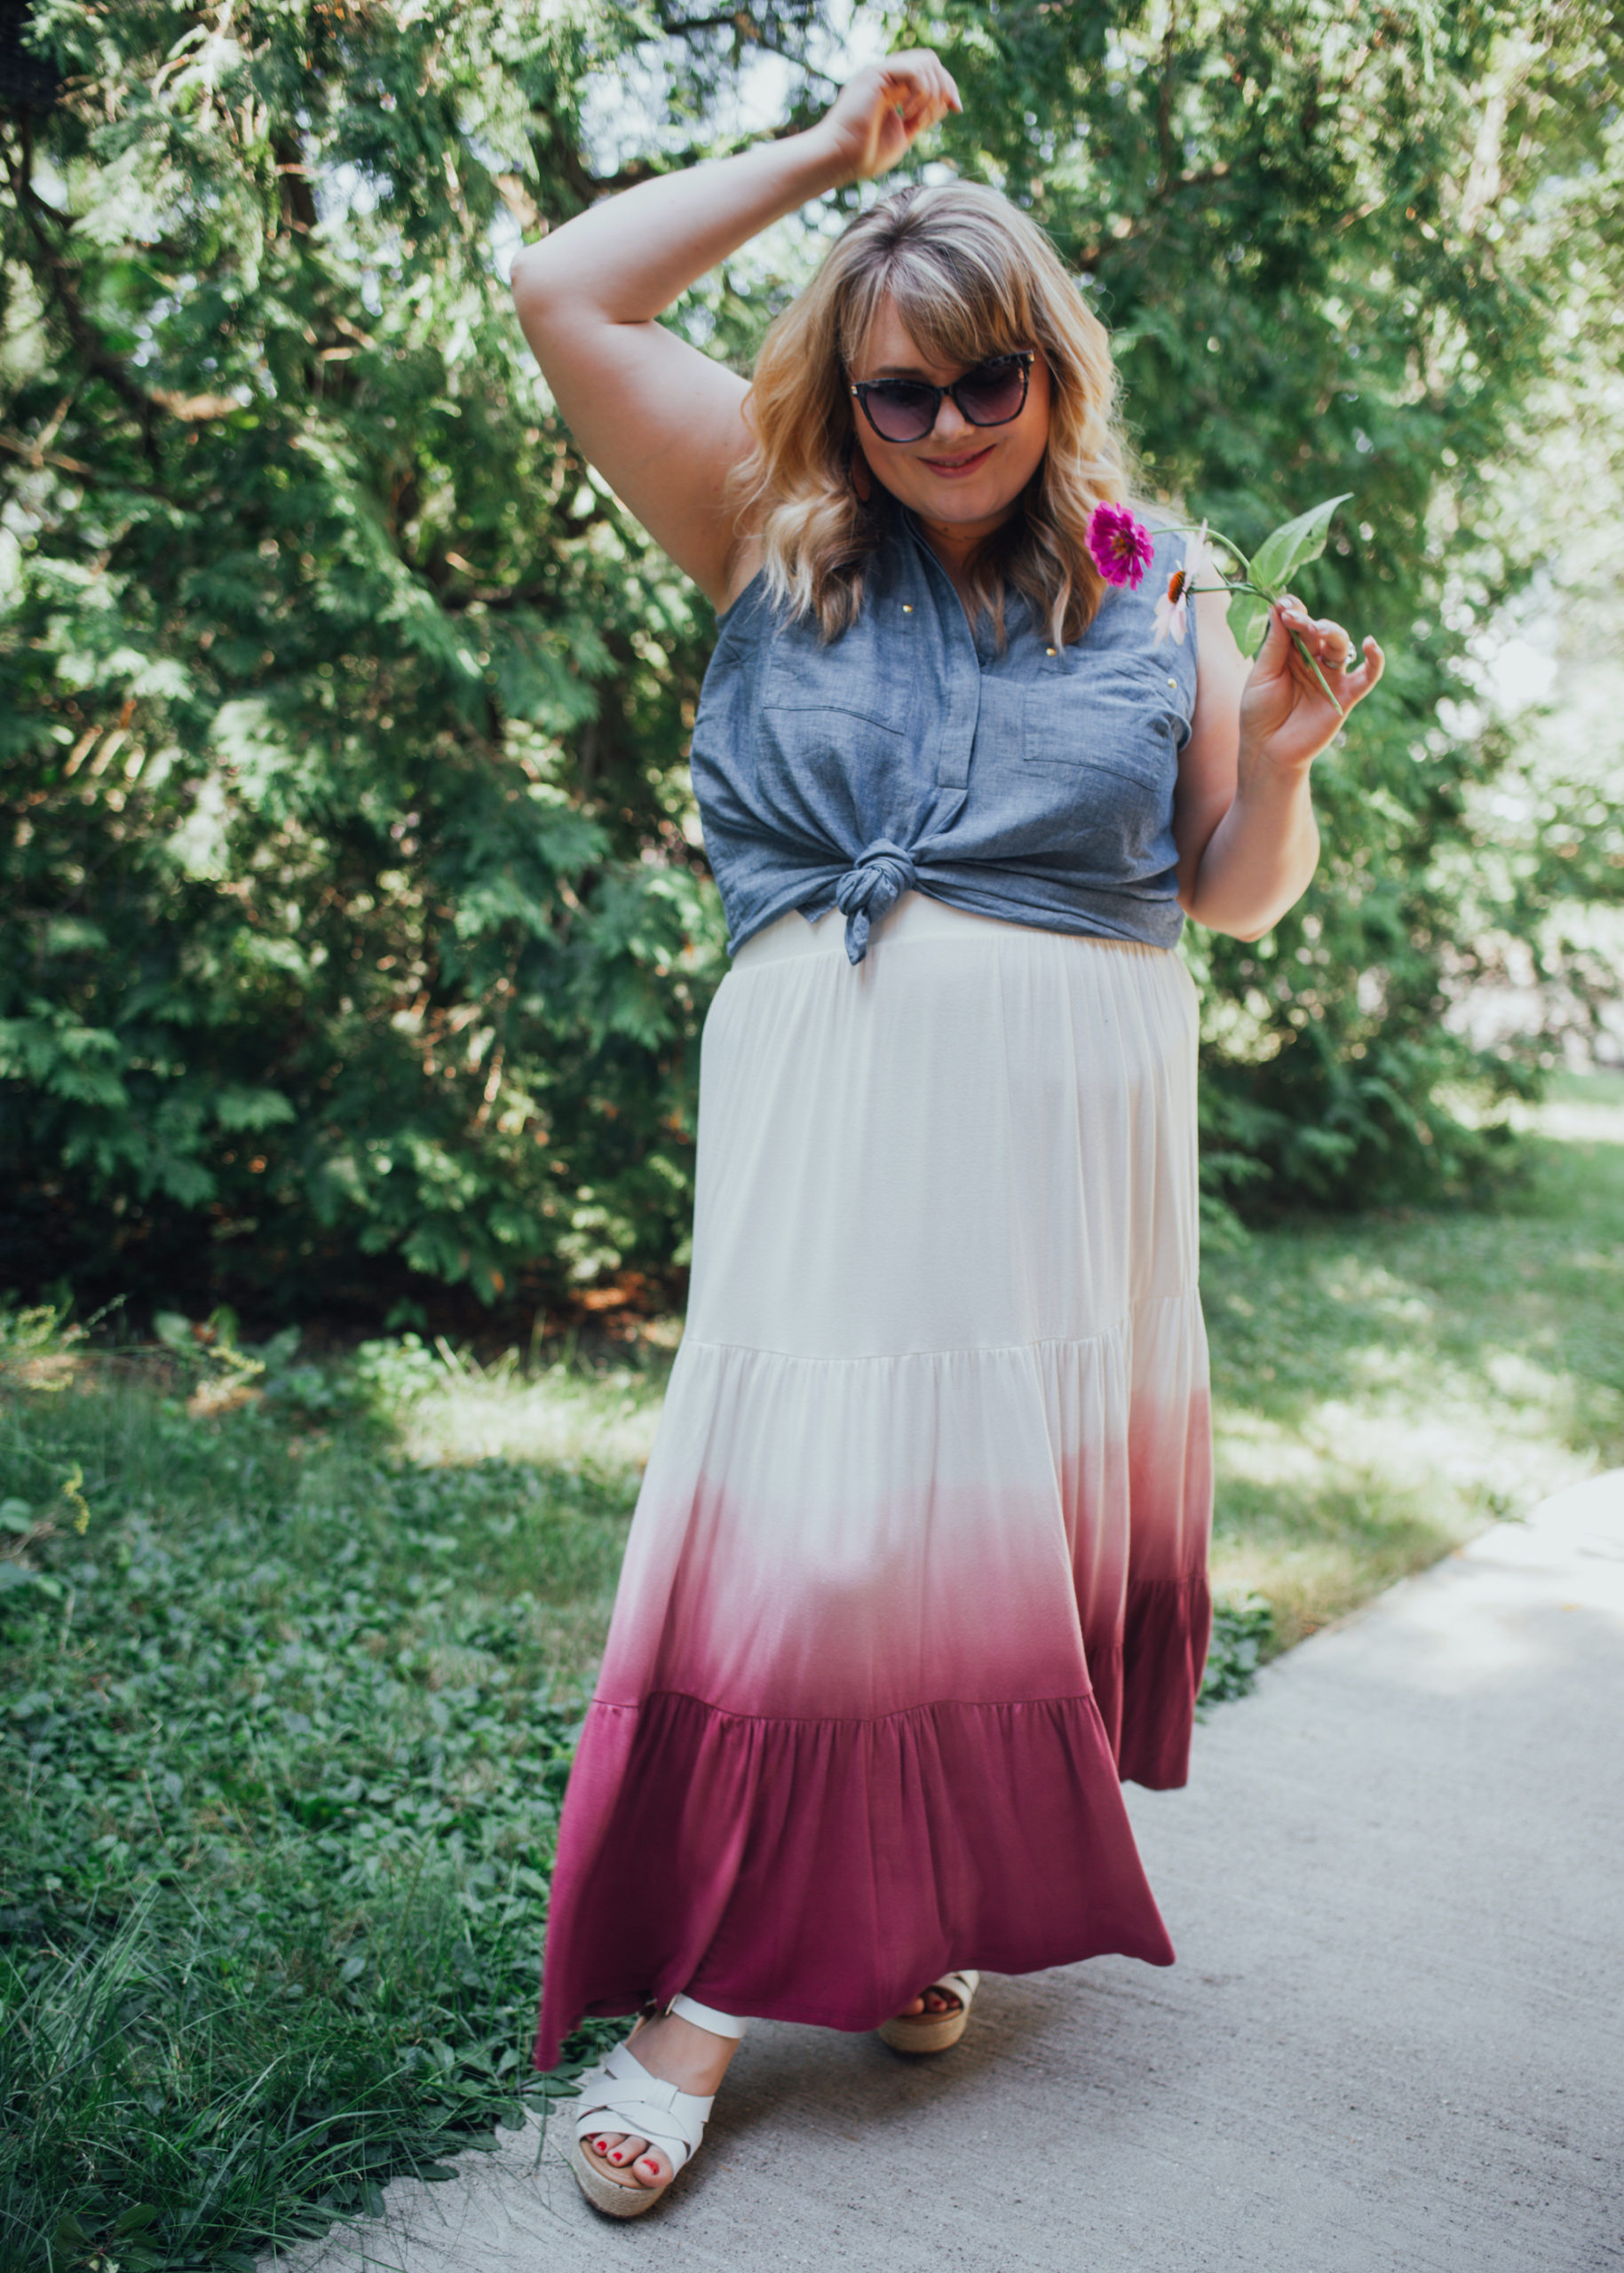 Sharing two tie dye pieces that are so fun to finish out the summer! Lane Bryant has plus size tie dye pieces. 